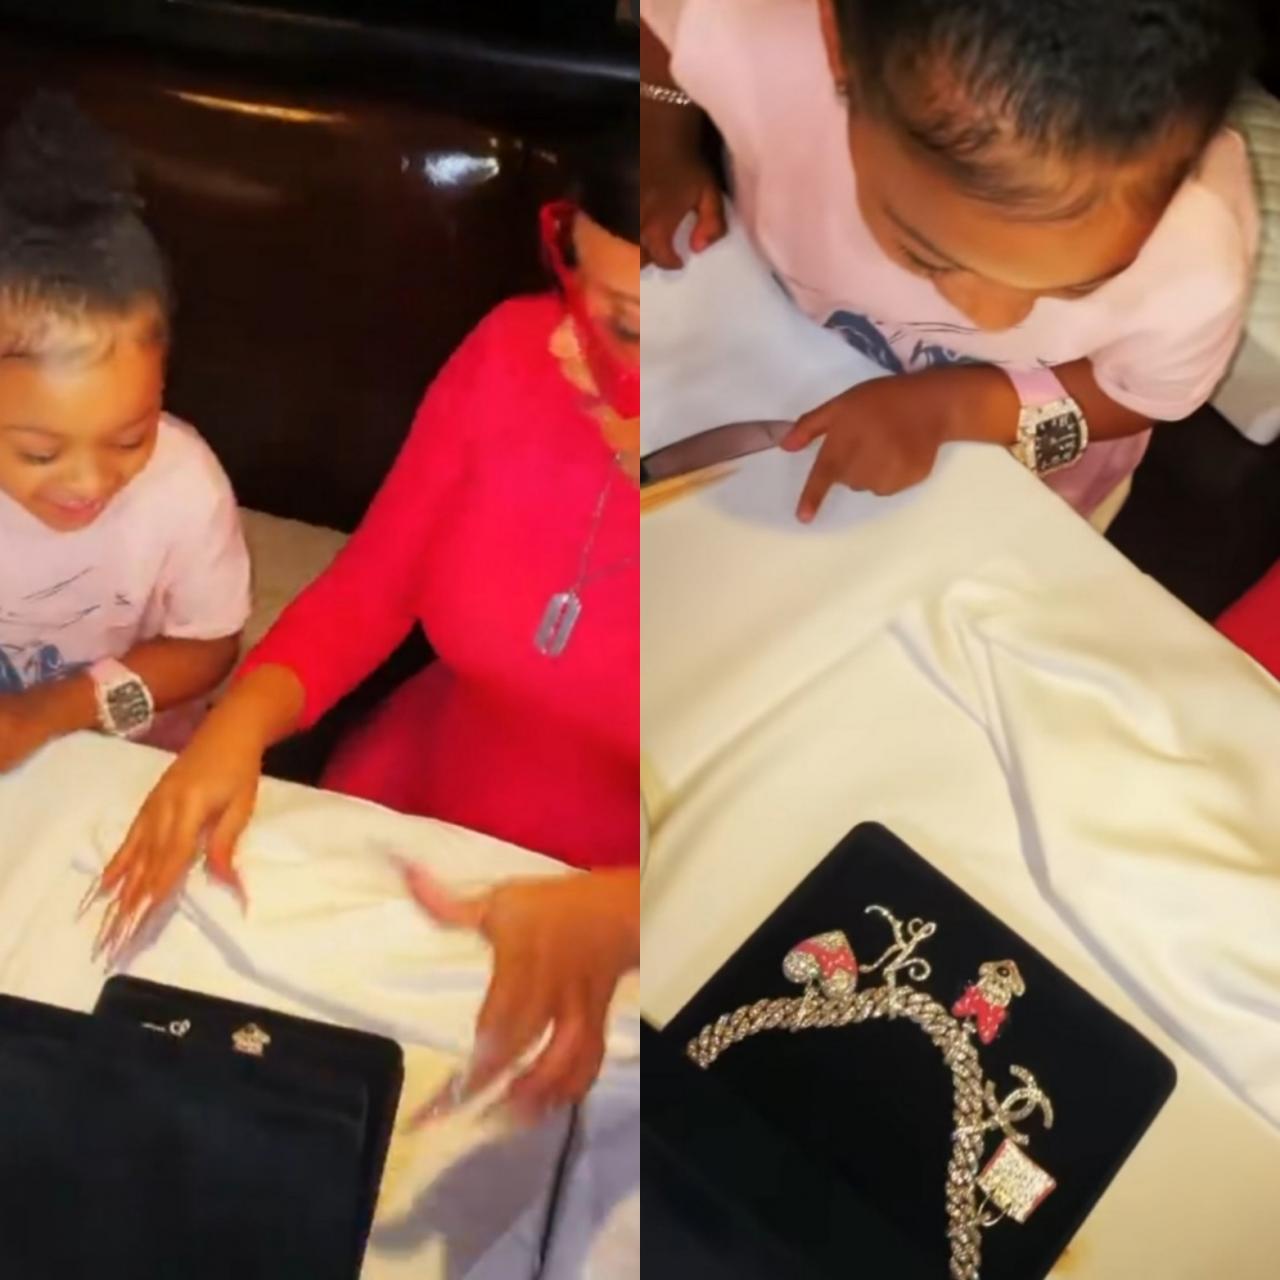 Cardi B gifts daughter, Kulture, a blinged-out charm necklace for her 3rd birthday after Offset gave the child a 0,000 Richard Mille watch (video)